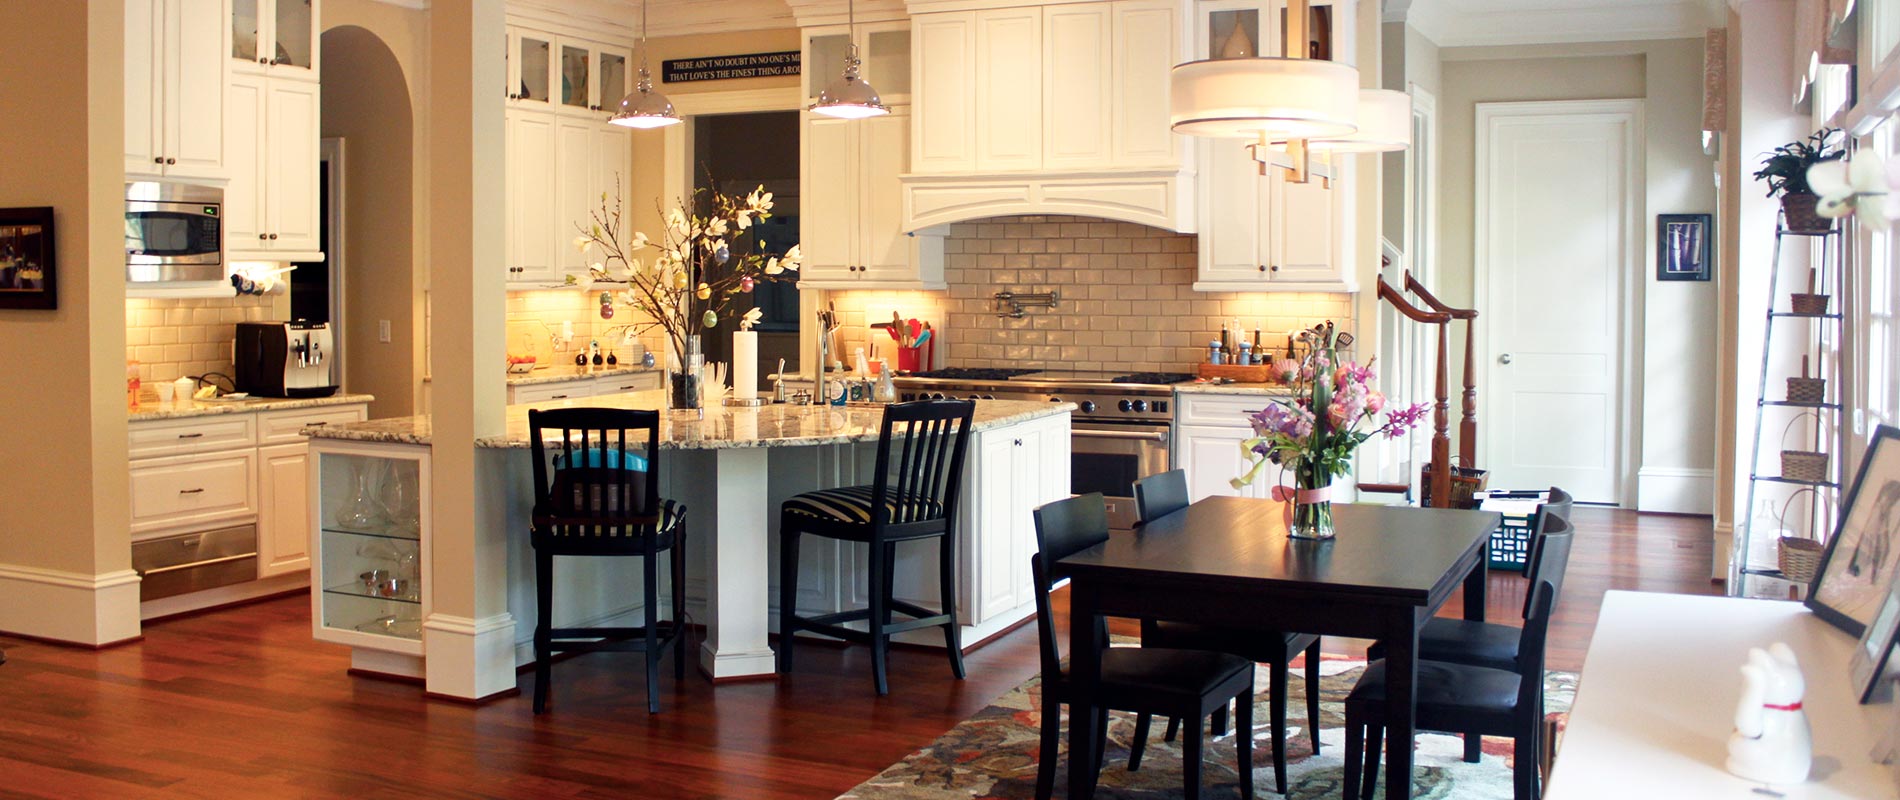 Kitchen Remodel | Complete Construction Company | Raleigh, NC